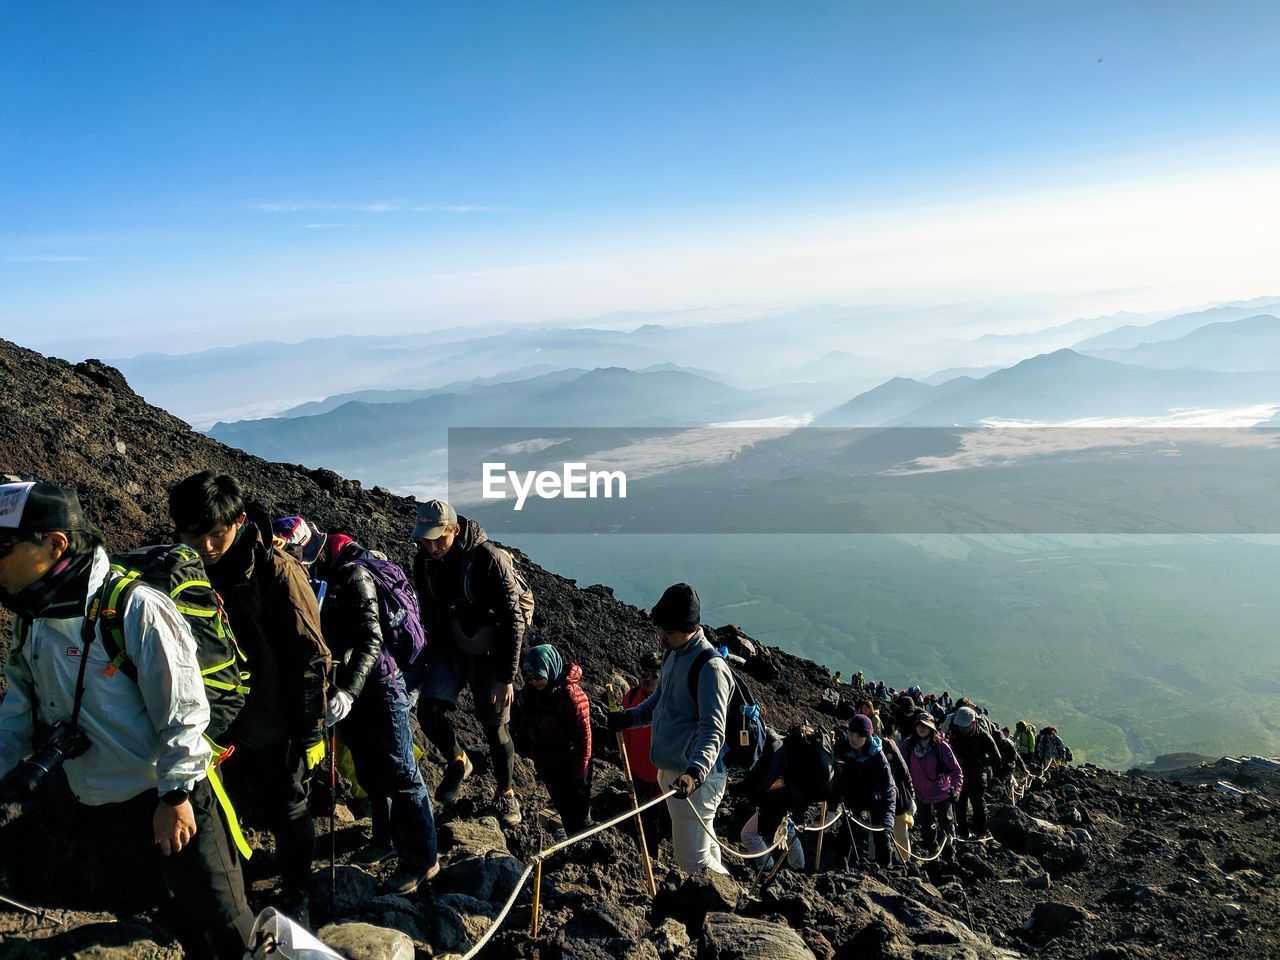 PANORAMIC SHOT OF CROWD ON MOUNTAIN AGAINST SKY